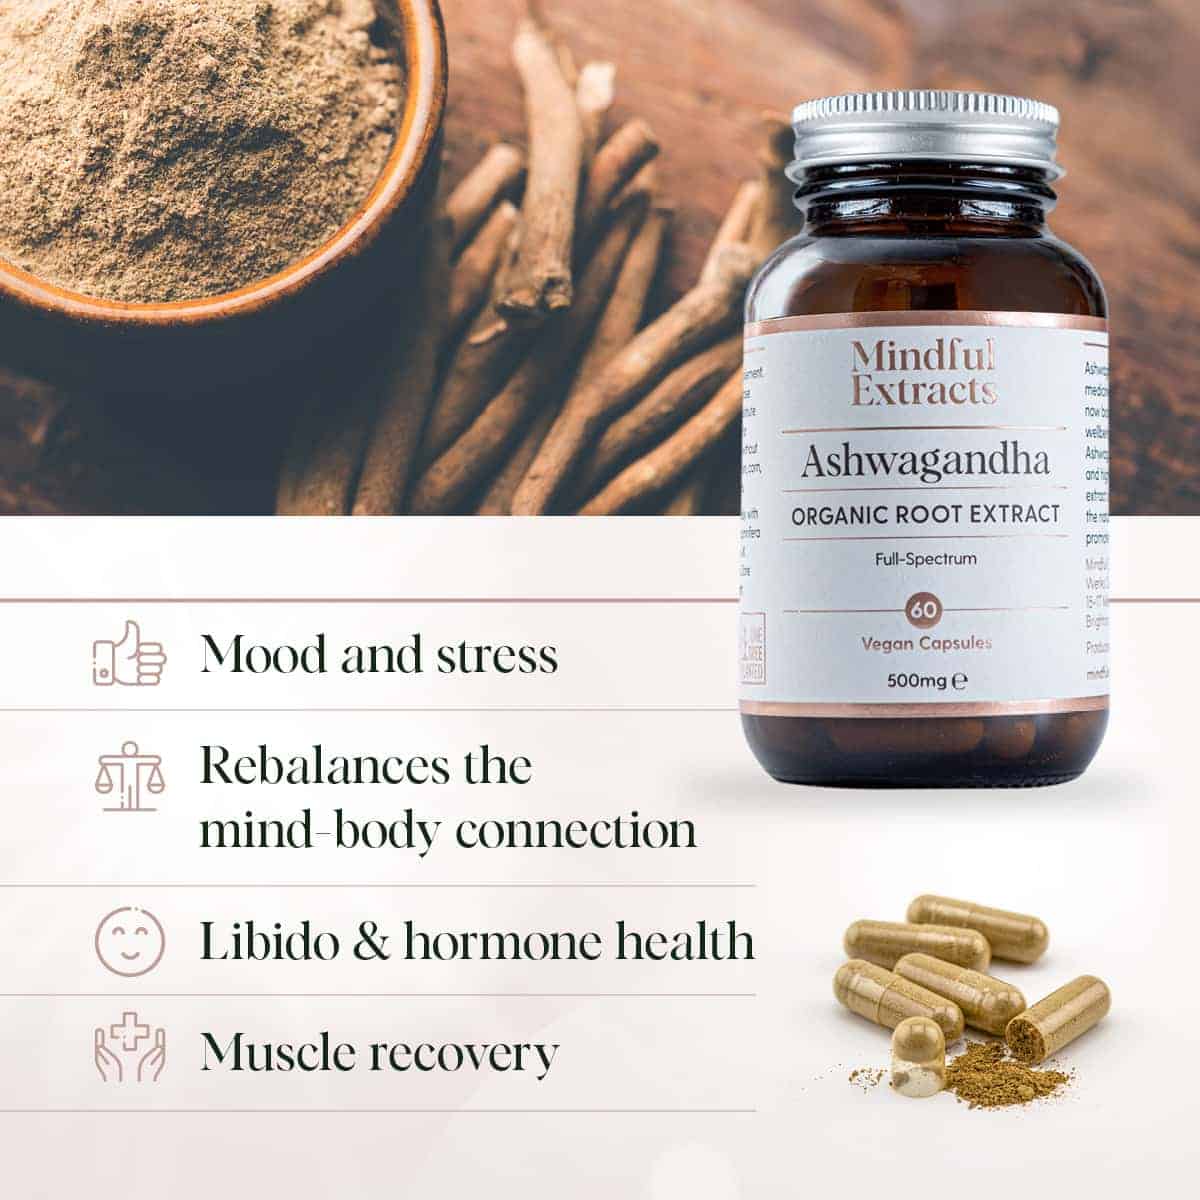 Ashwagandha is commonly used for stress and mood